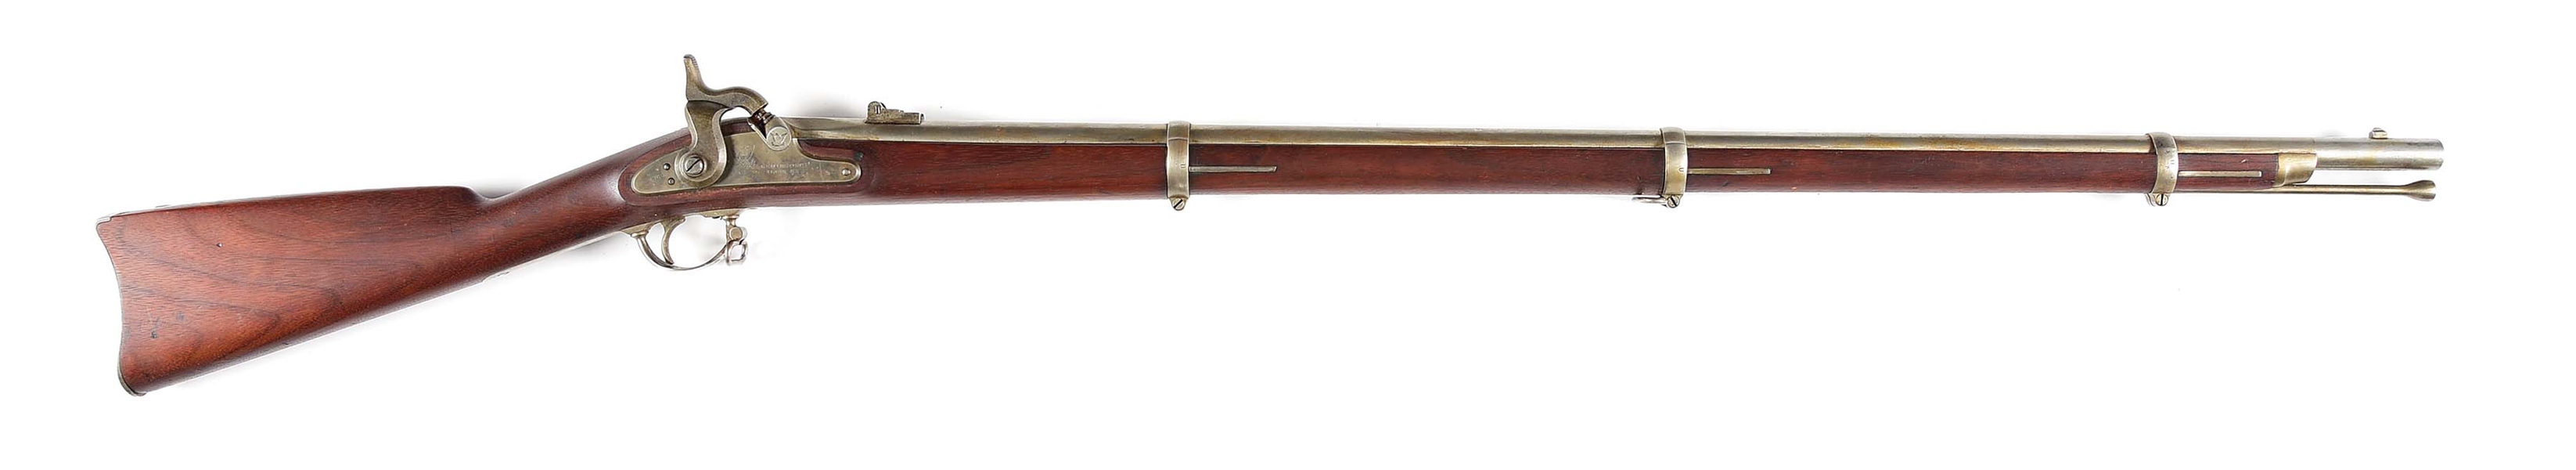 (A) VERY FINE REMINGTON MODEL 1863 .58 CALIBER CIVIL WAR CONTRACT RIFLED MUSKET DATED 1865.